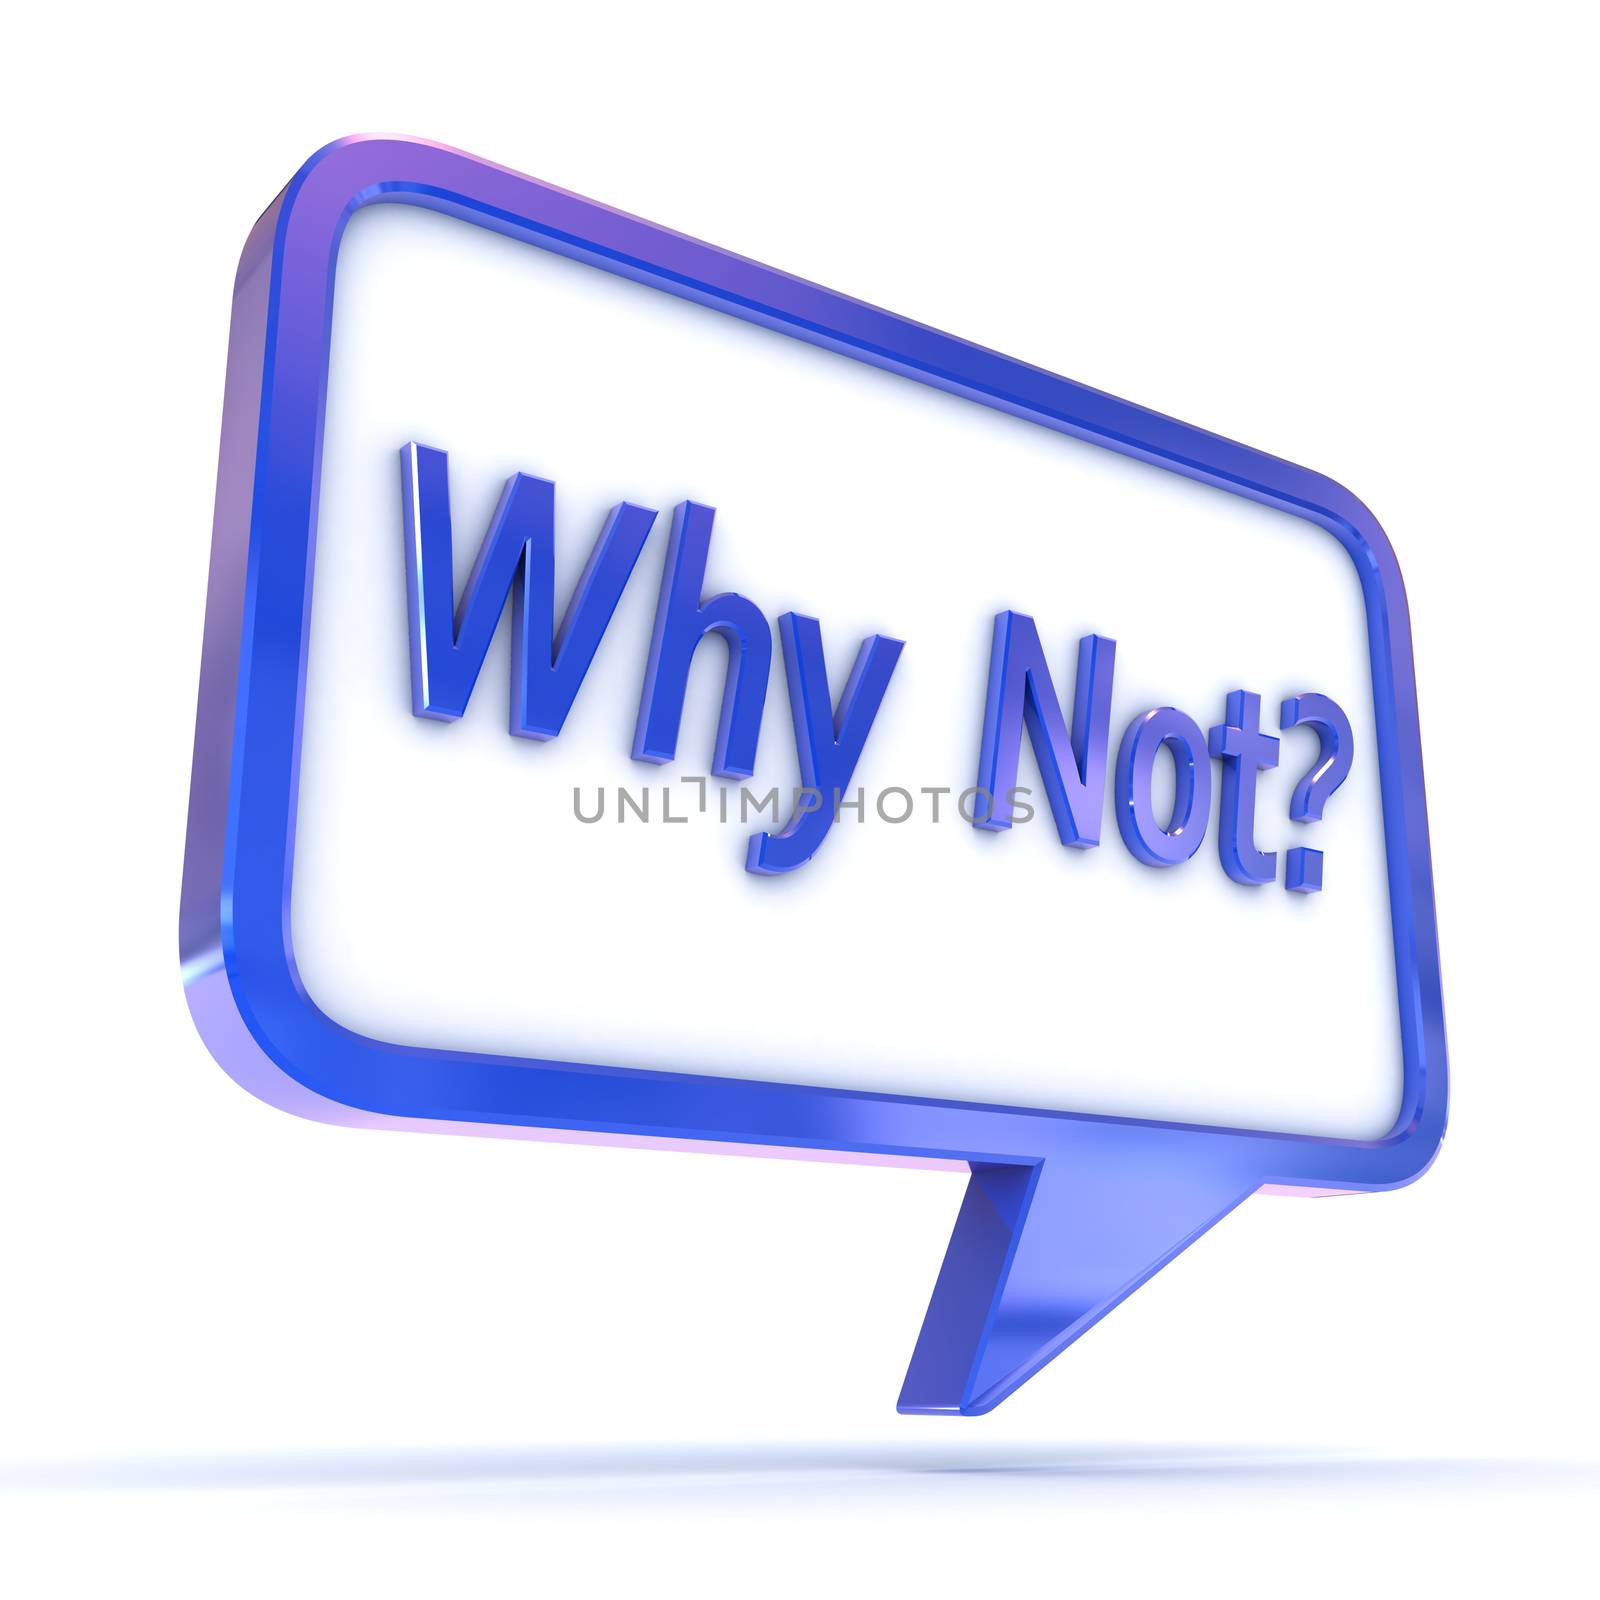 A Colourful 3d Rendered Concept Illustration showing "Why Not?" writen in a Speech Bubble